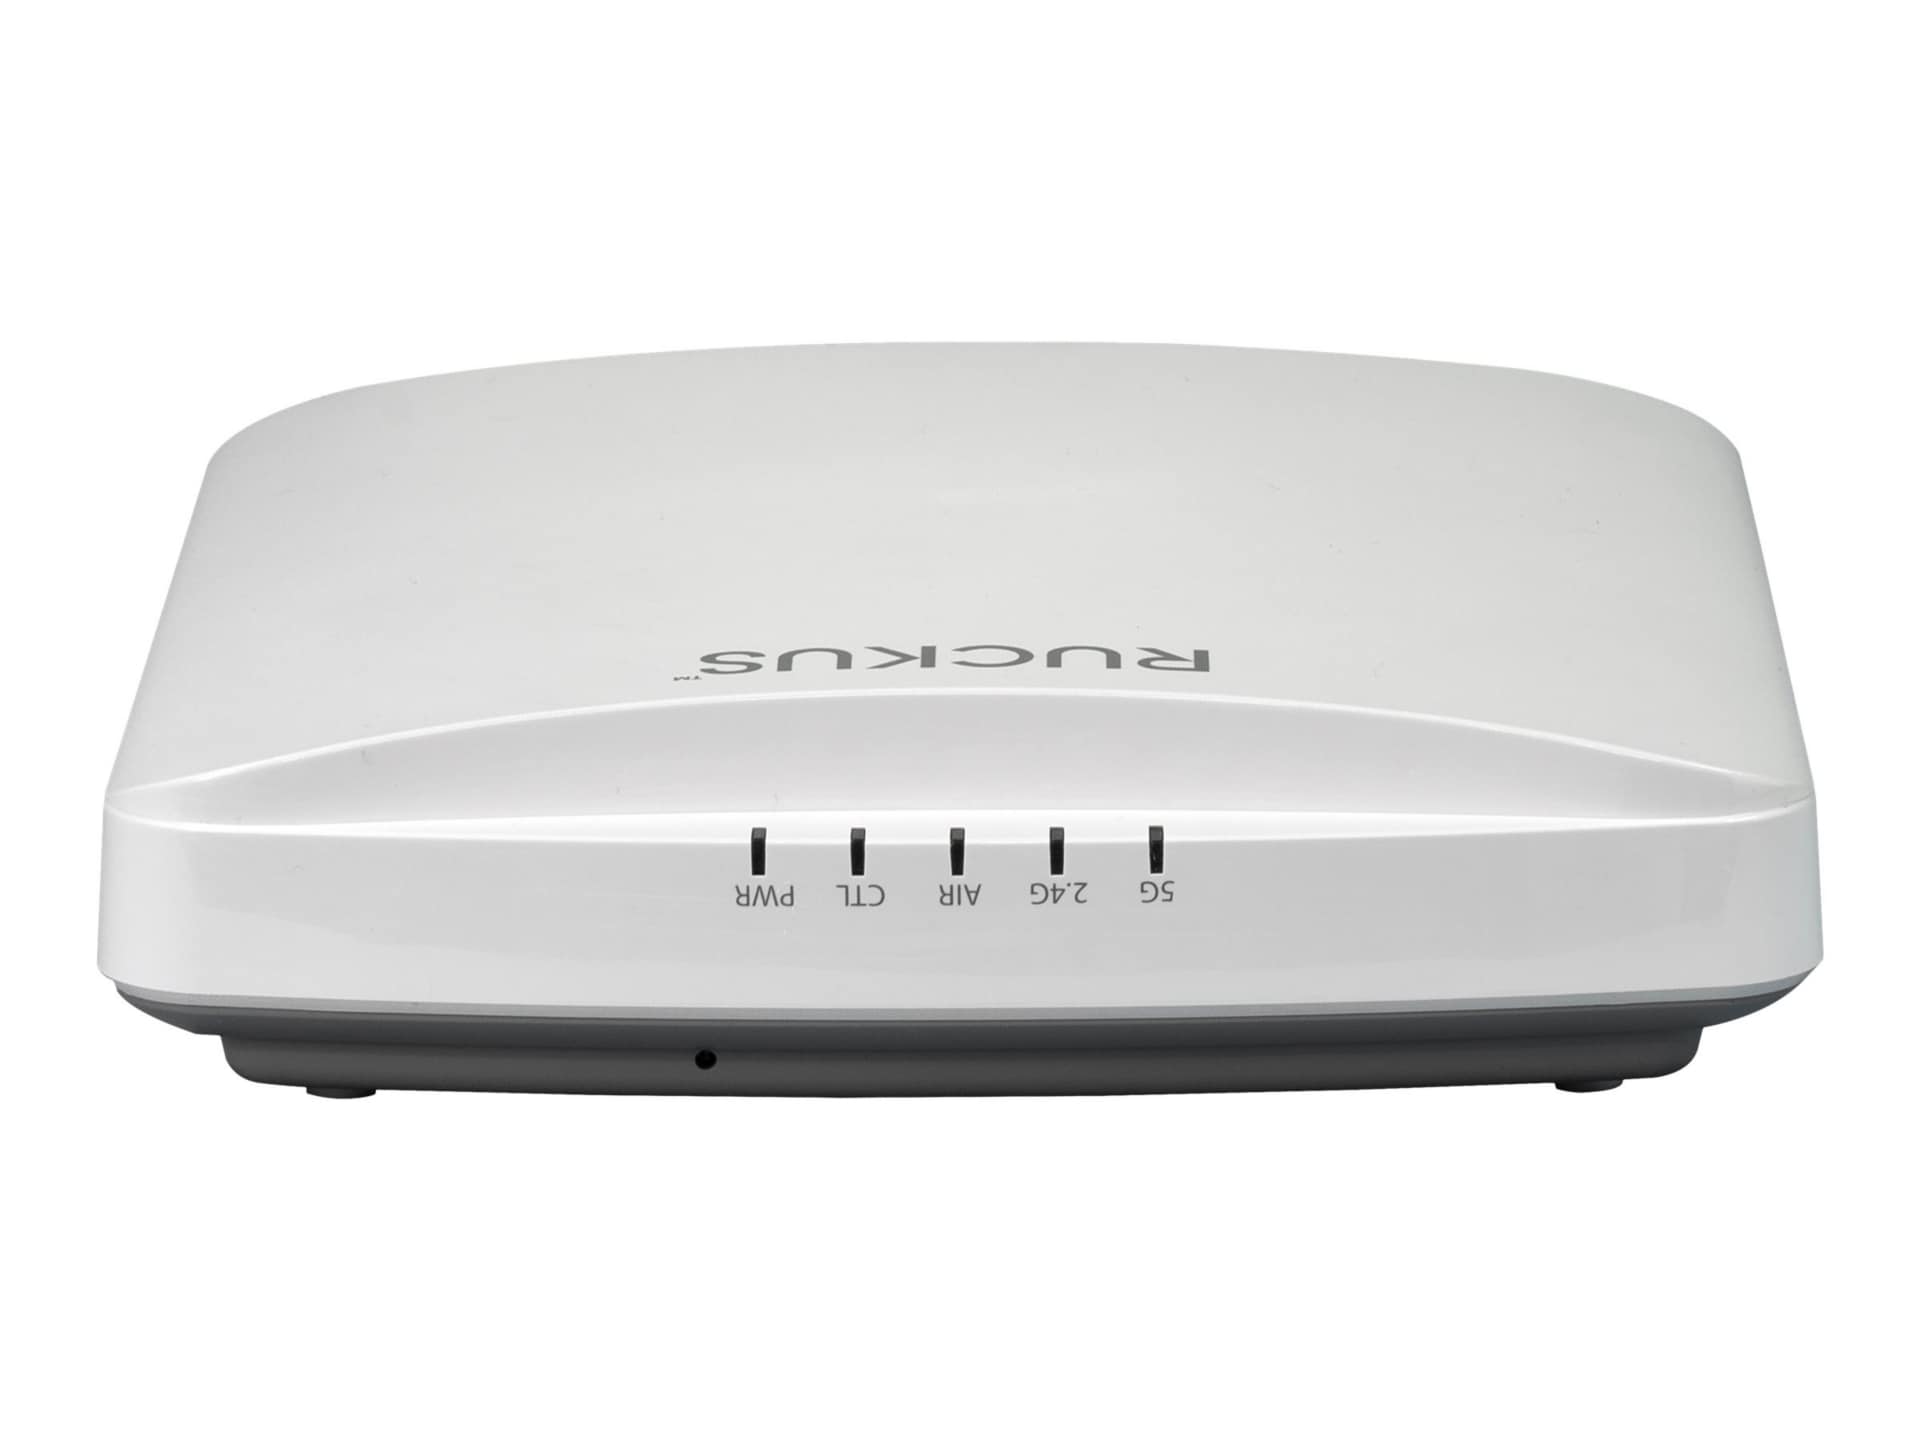 Ruckus R650 - Unleashed - wireless access point - Wi-Fi 6